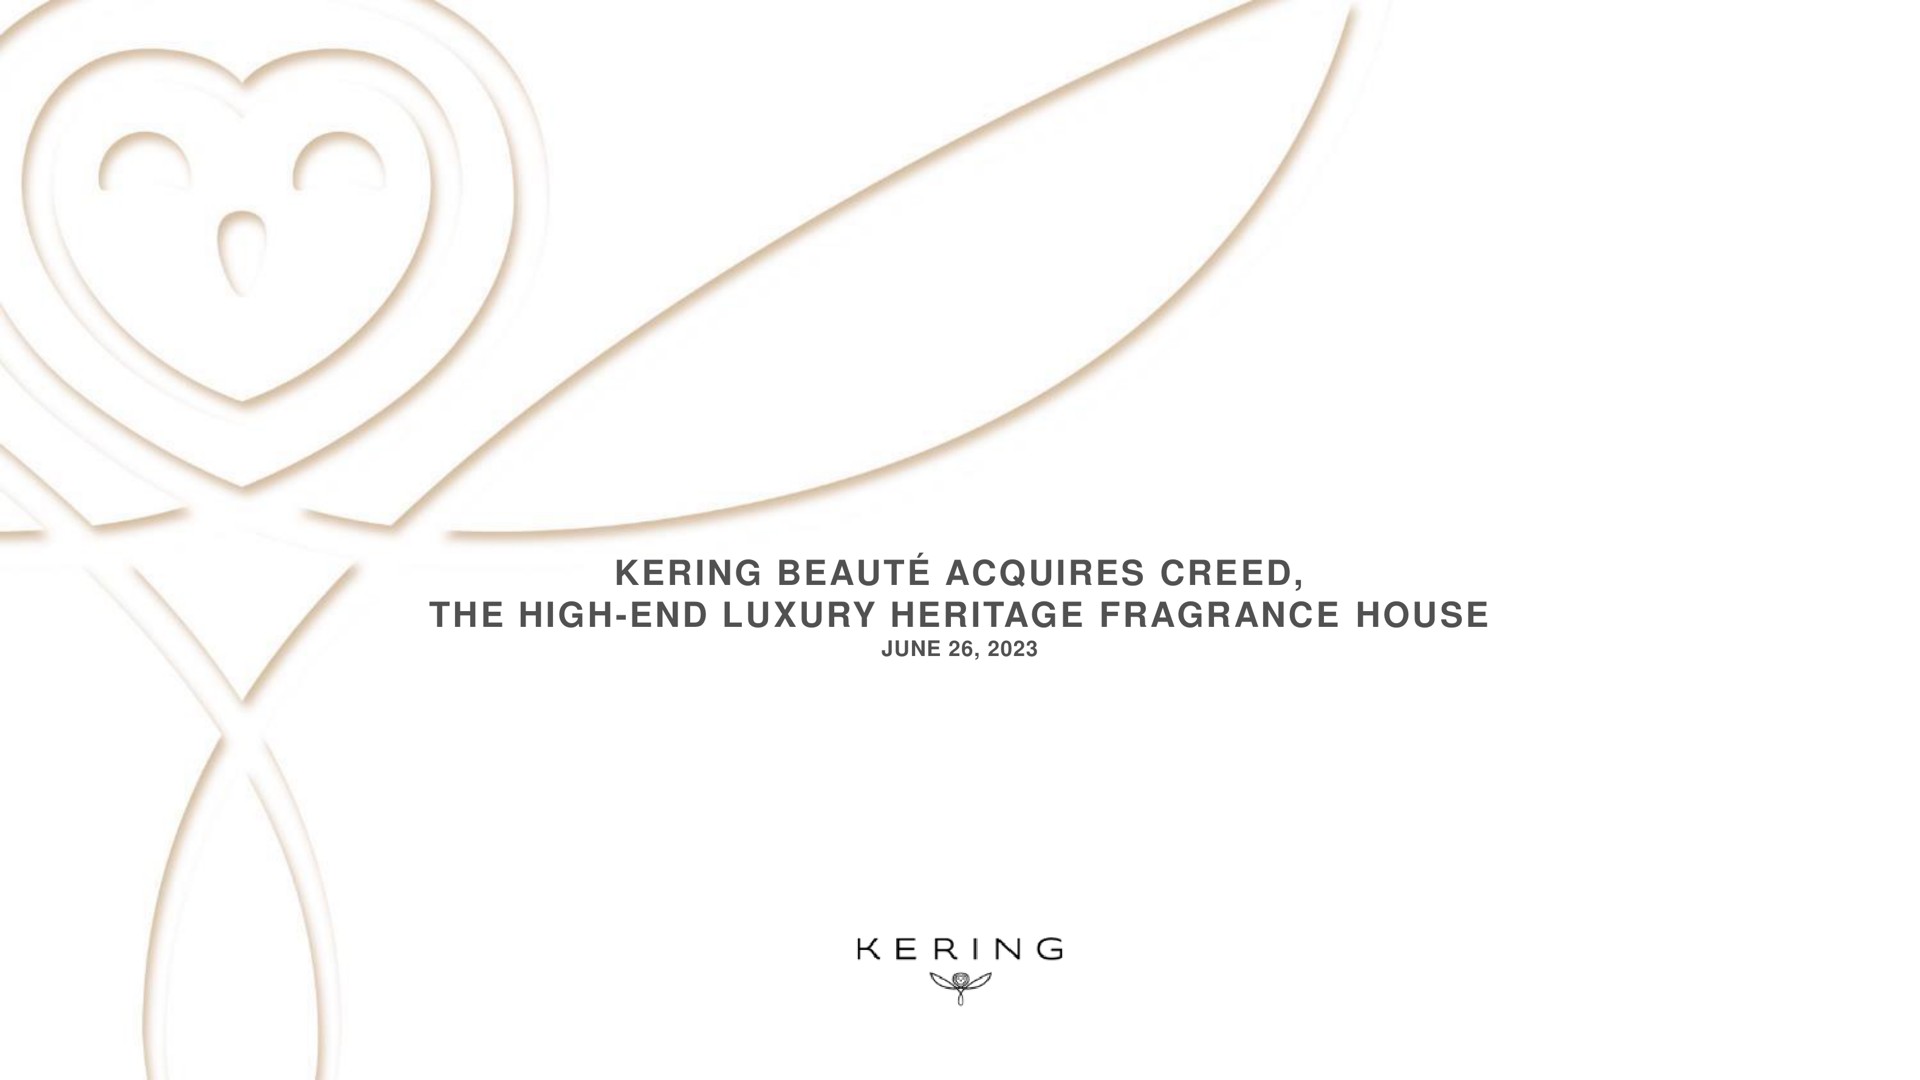 acquires creed the high end luxury heritage fragrance house | Kering